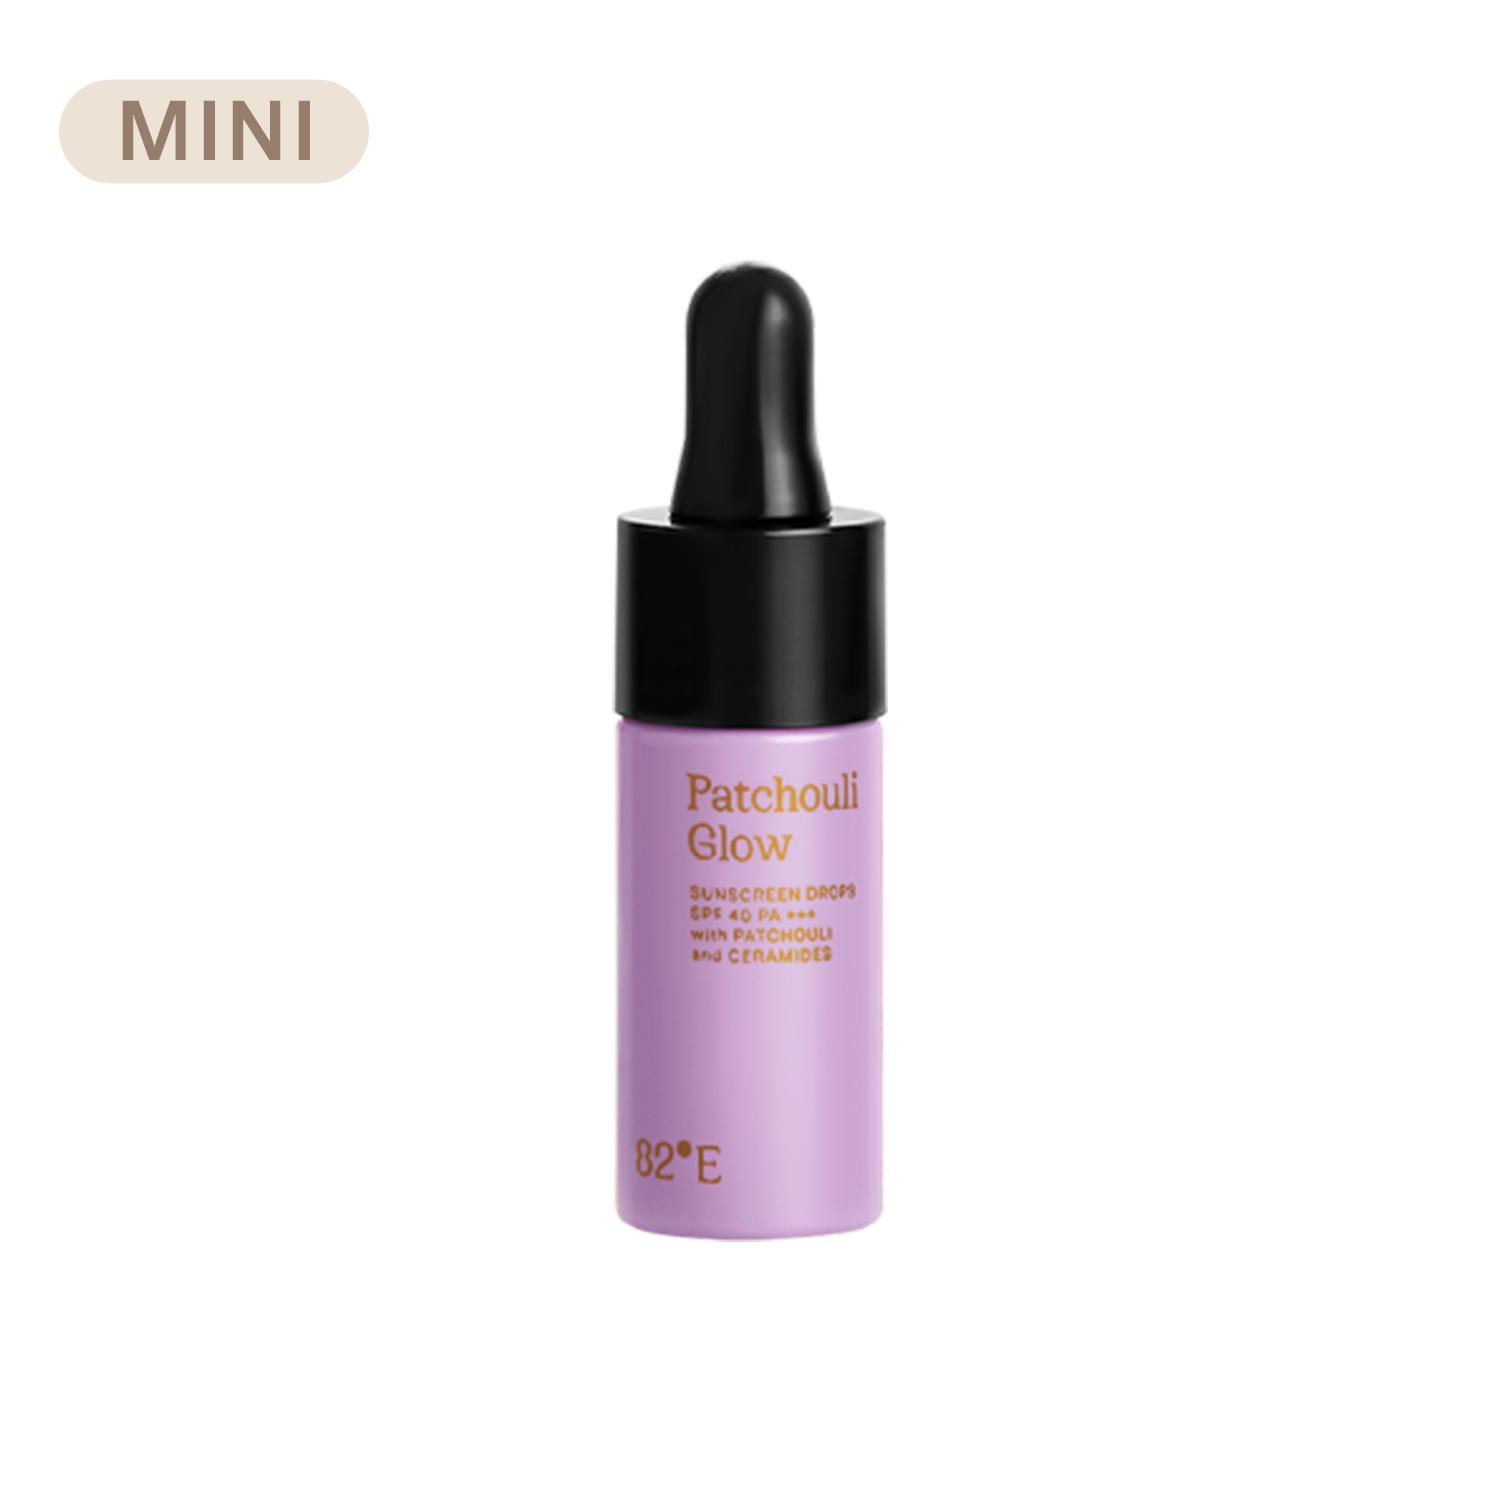 82°E | 82°E Patchouli Glow Sunscreen Oil SPF 40 PA+++ with Patchouli and Ceramides (15 ml)